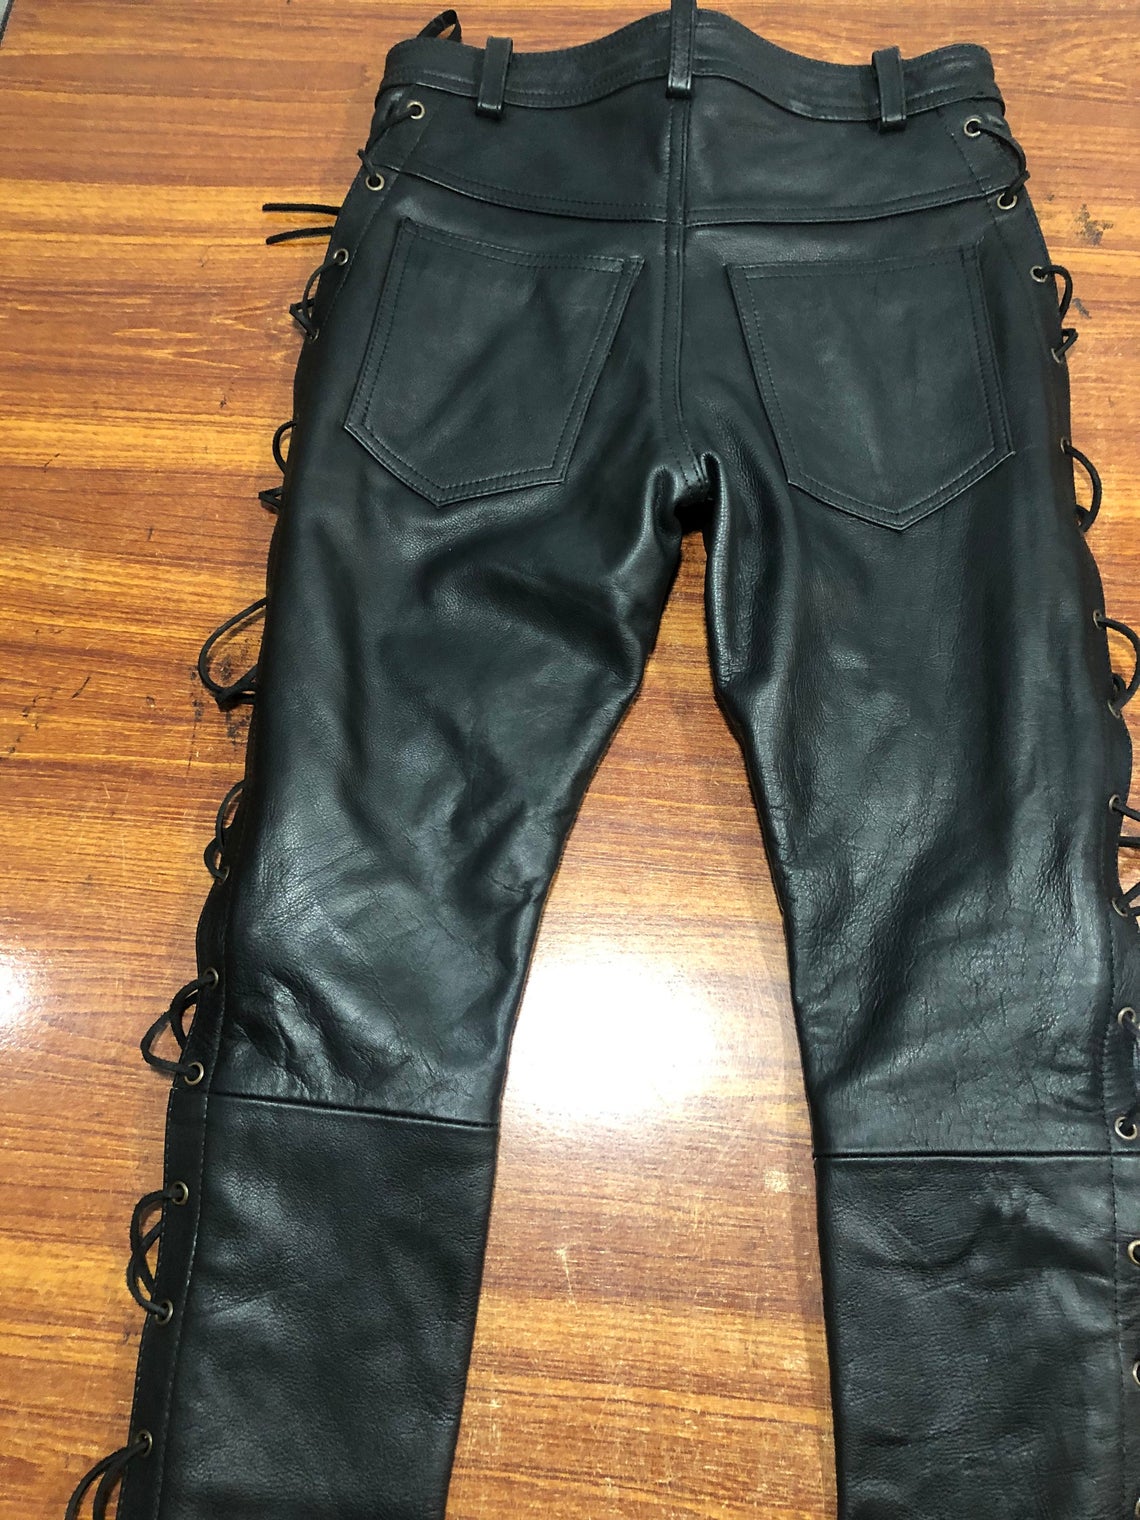 RST Tour 1 CE Leather Trousers  Regular  Motorcycle Clothing  Bike Stop  UK